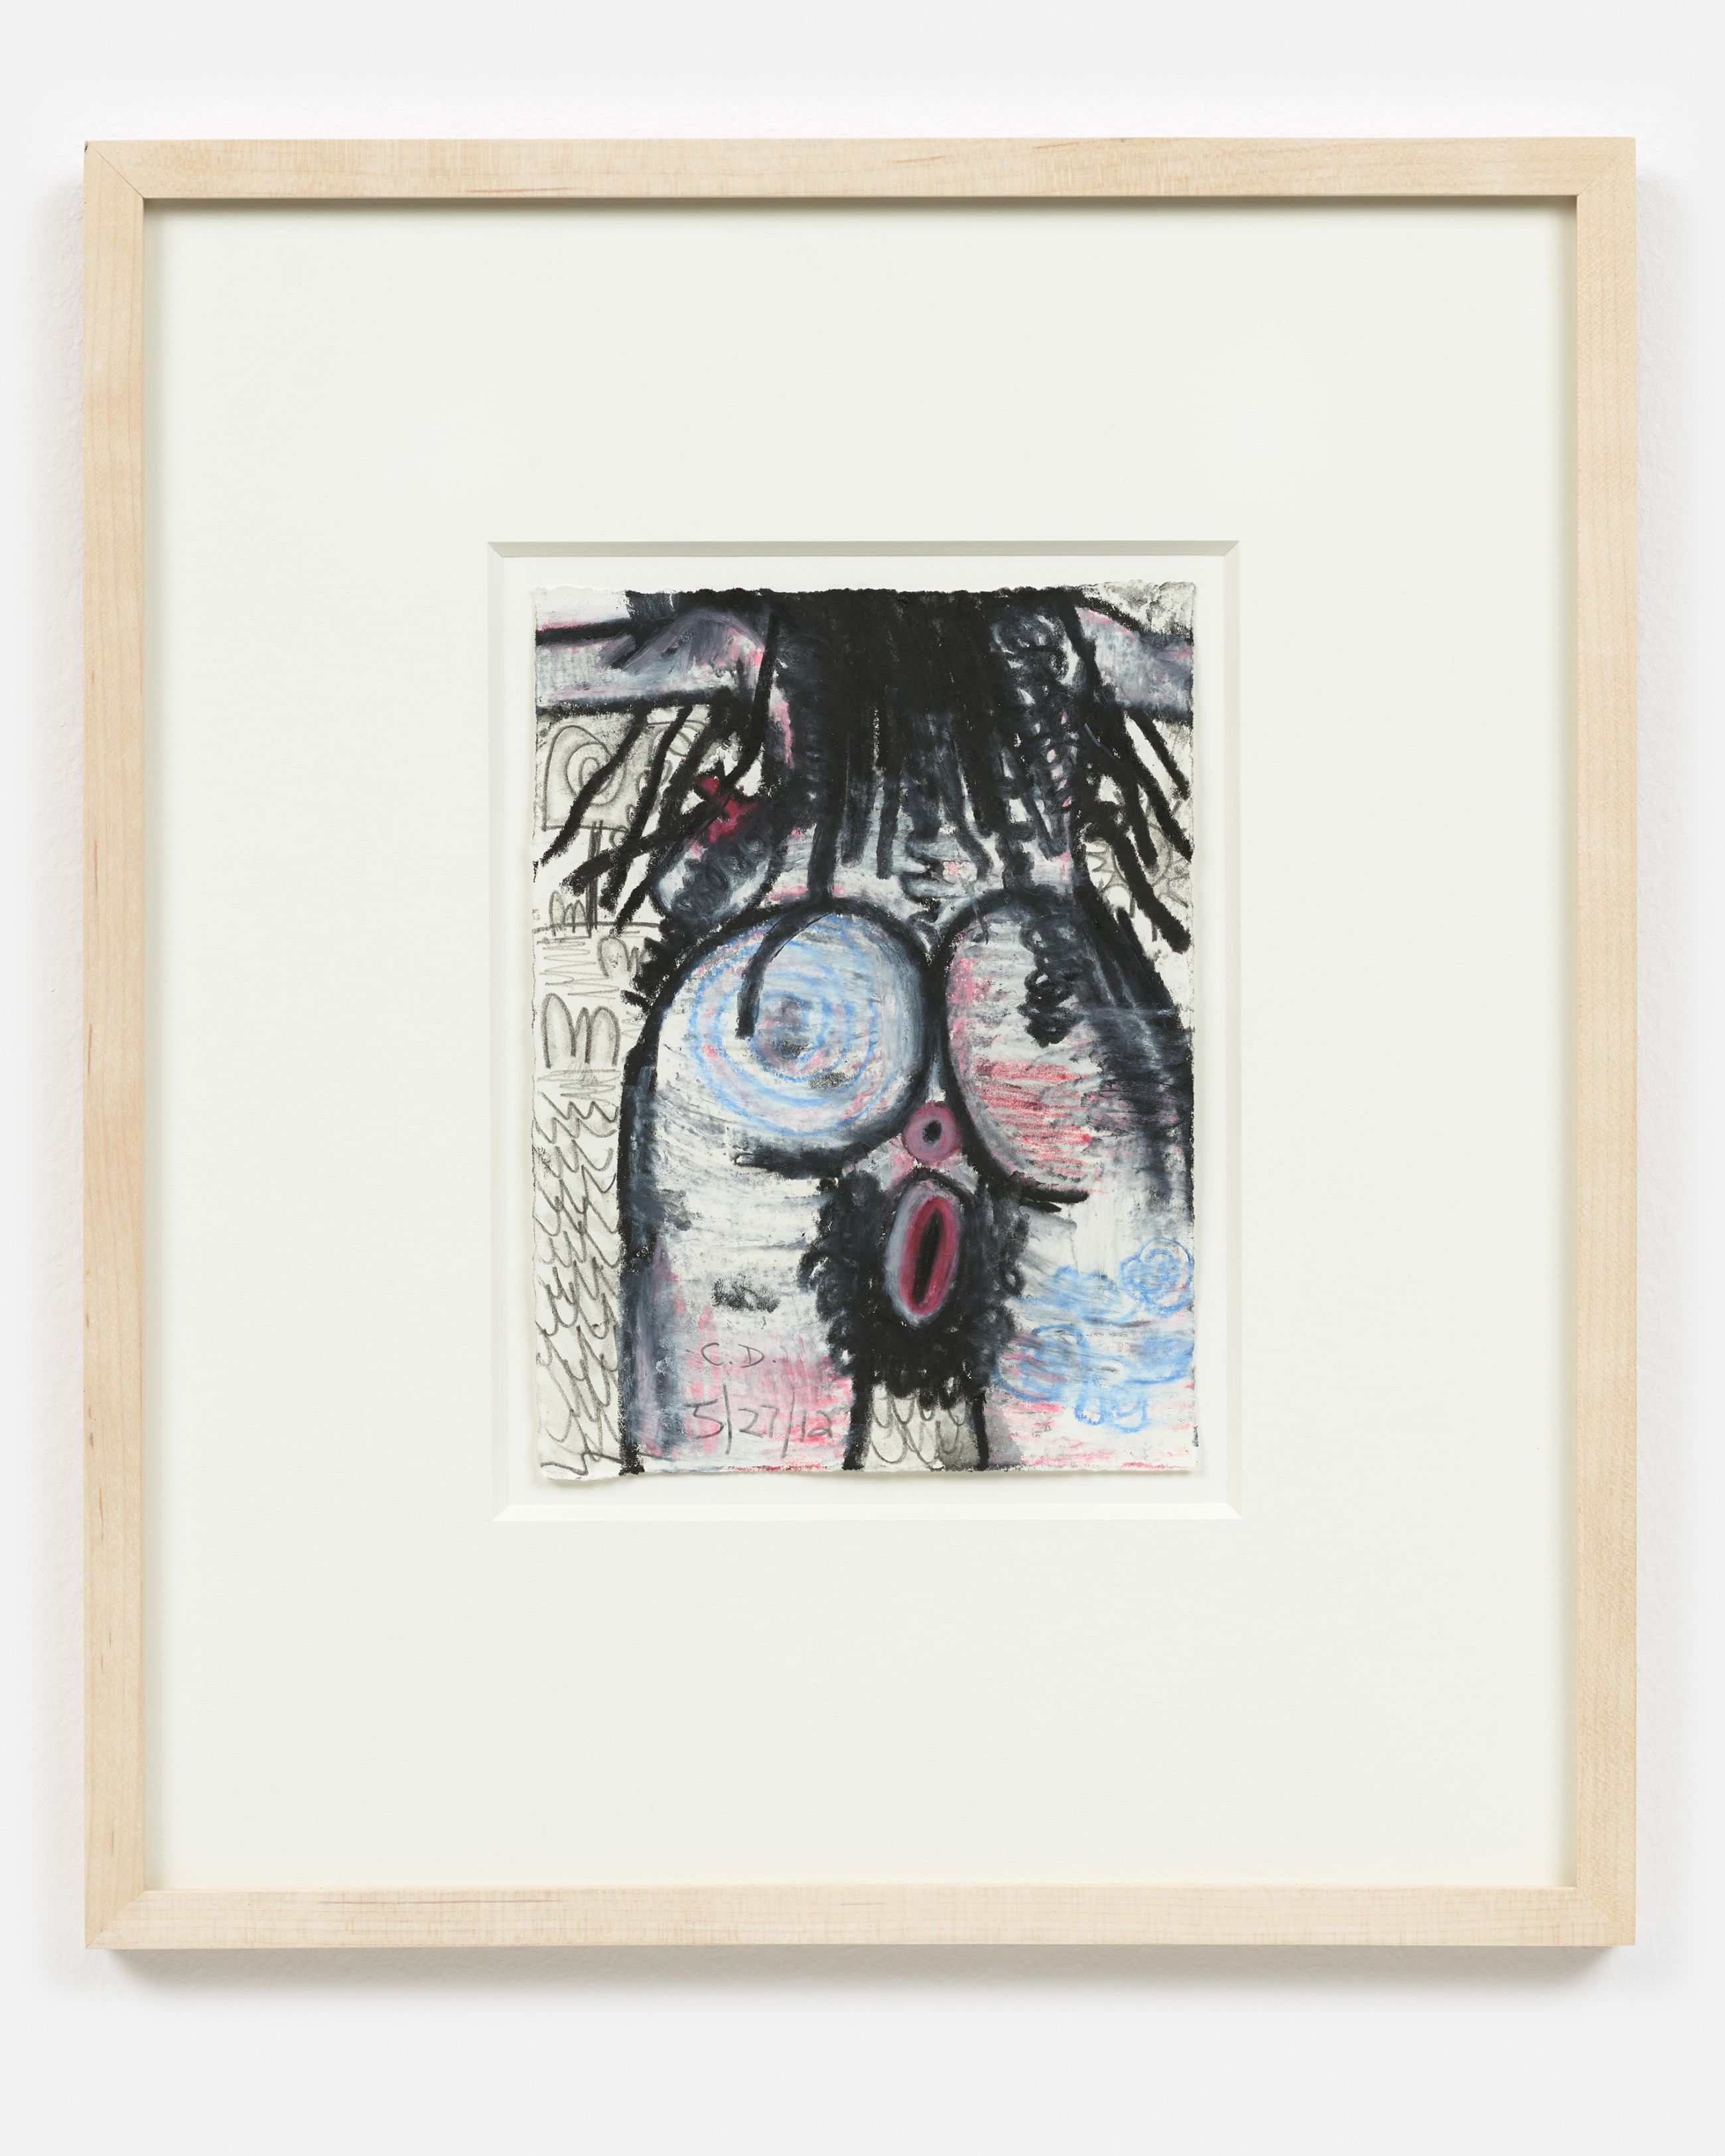 Carroll Dunham | Michael Williams-Drawingscurated by Cornelius Tittel ...